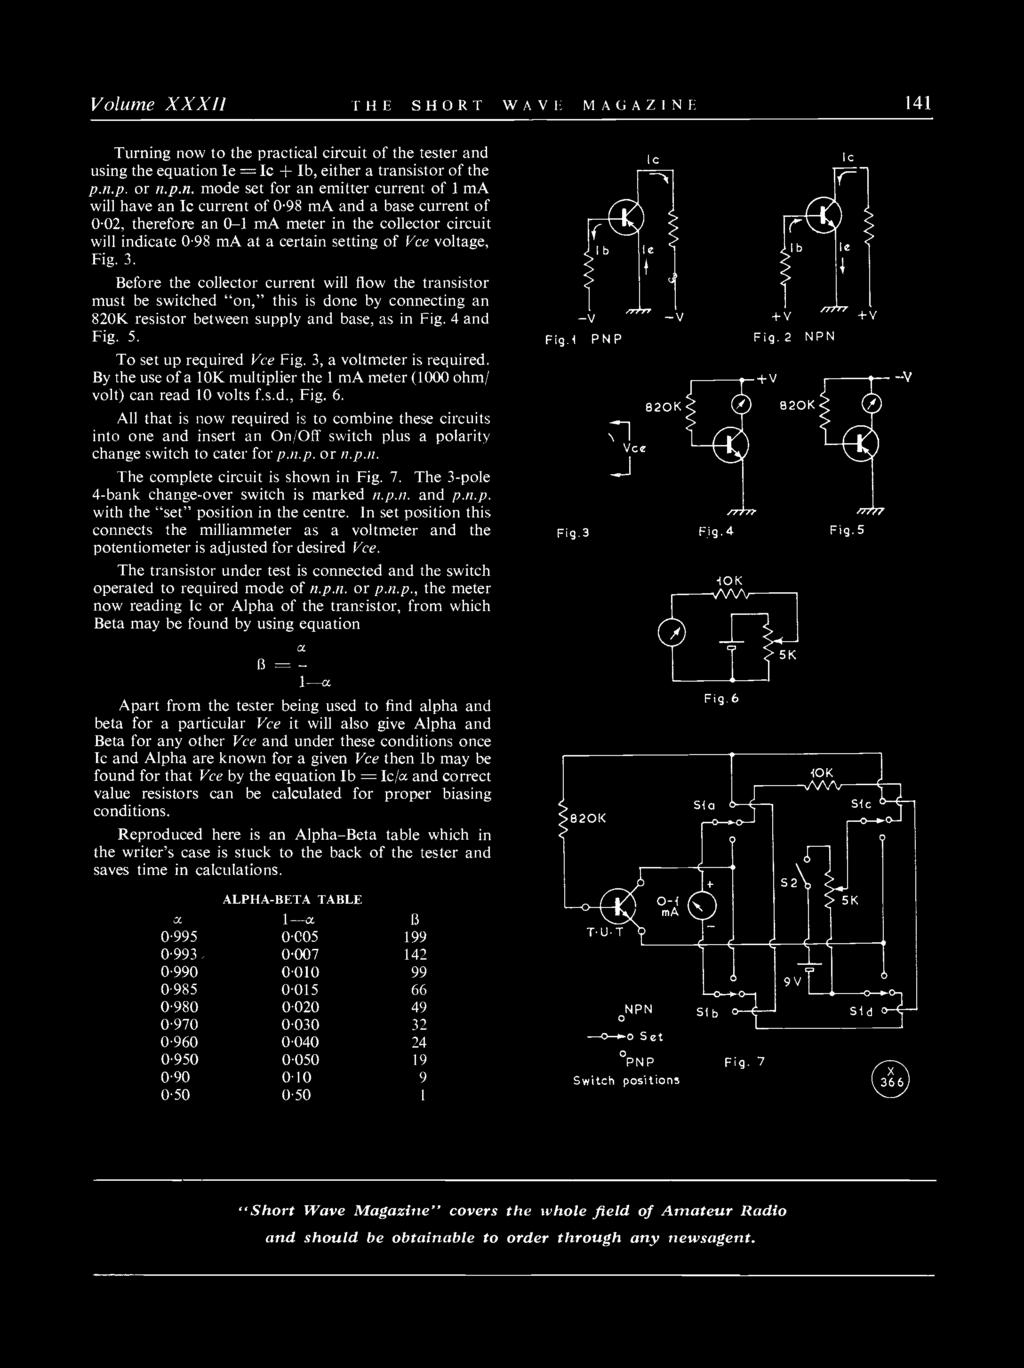 Volume XXXII THE SHORT WAVE MAGAZINE 141 Turning now to the practical circuit of the tester and using the equation Ie = Ic Ib, either a transistor of the p.n.p. or n.p.n. mode set for an emitter current of 1 ma will have an Ic current of 0.